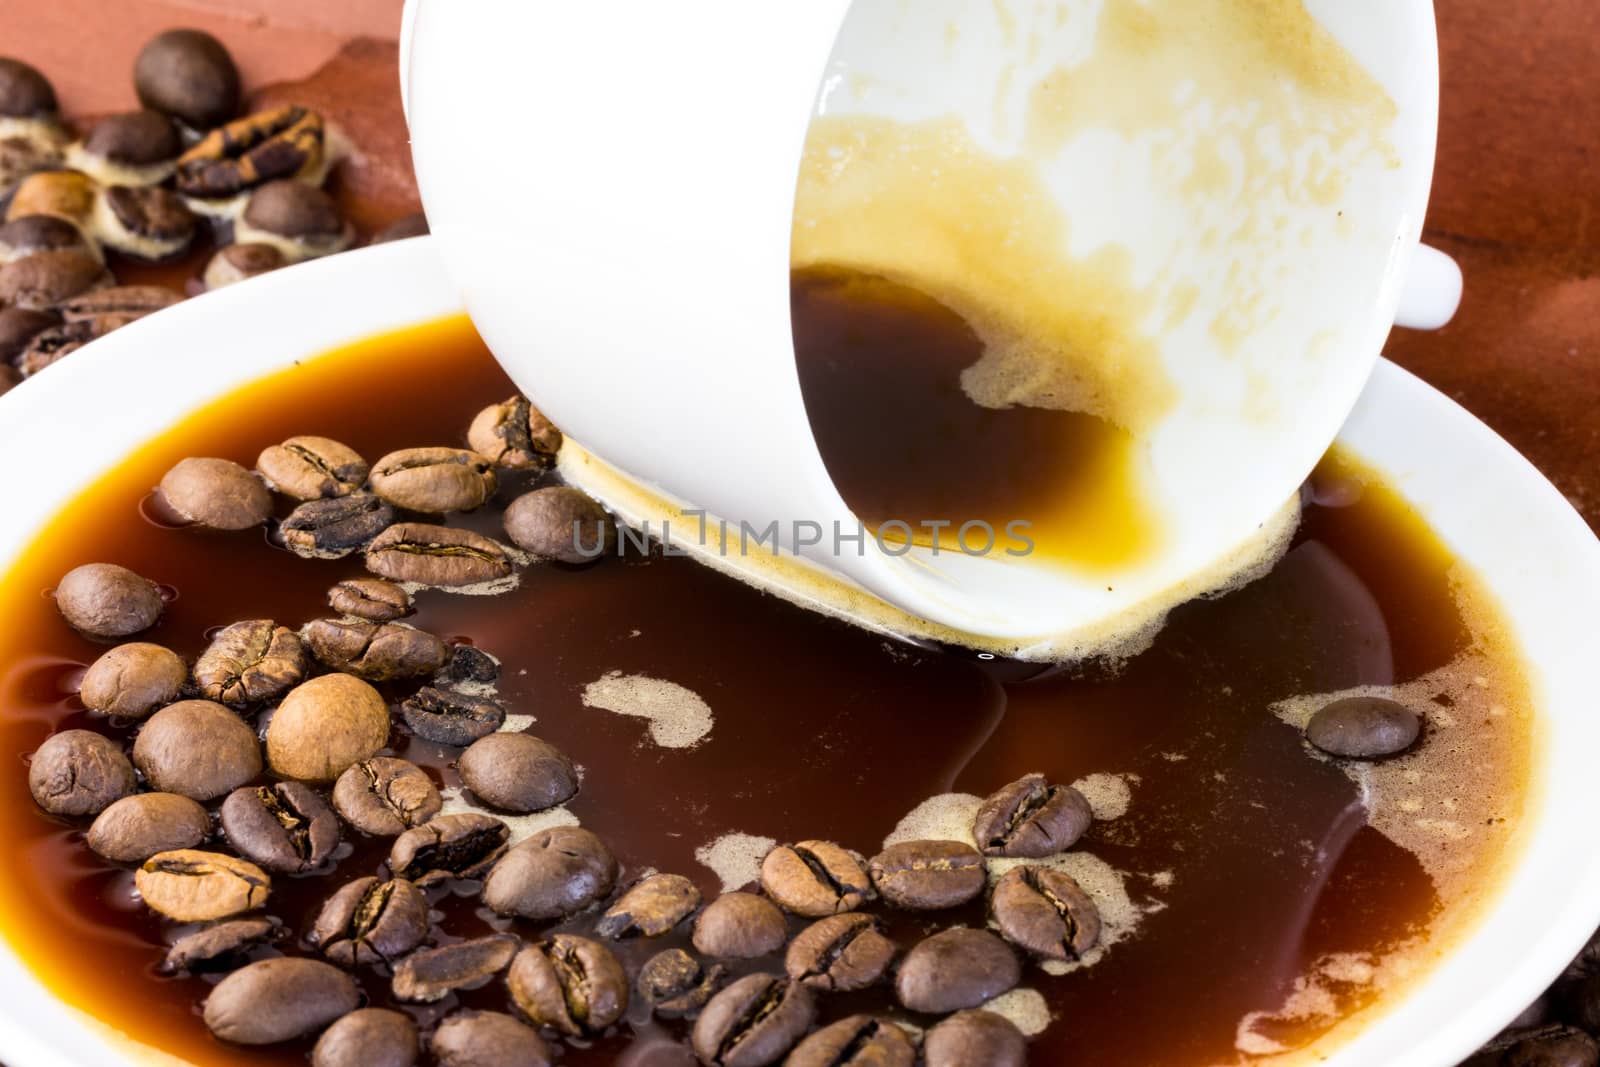 Spilled coffee with liquid and bean